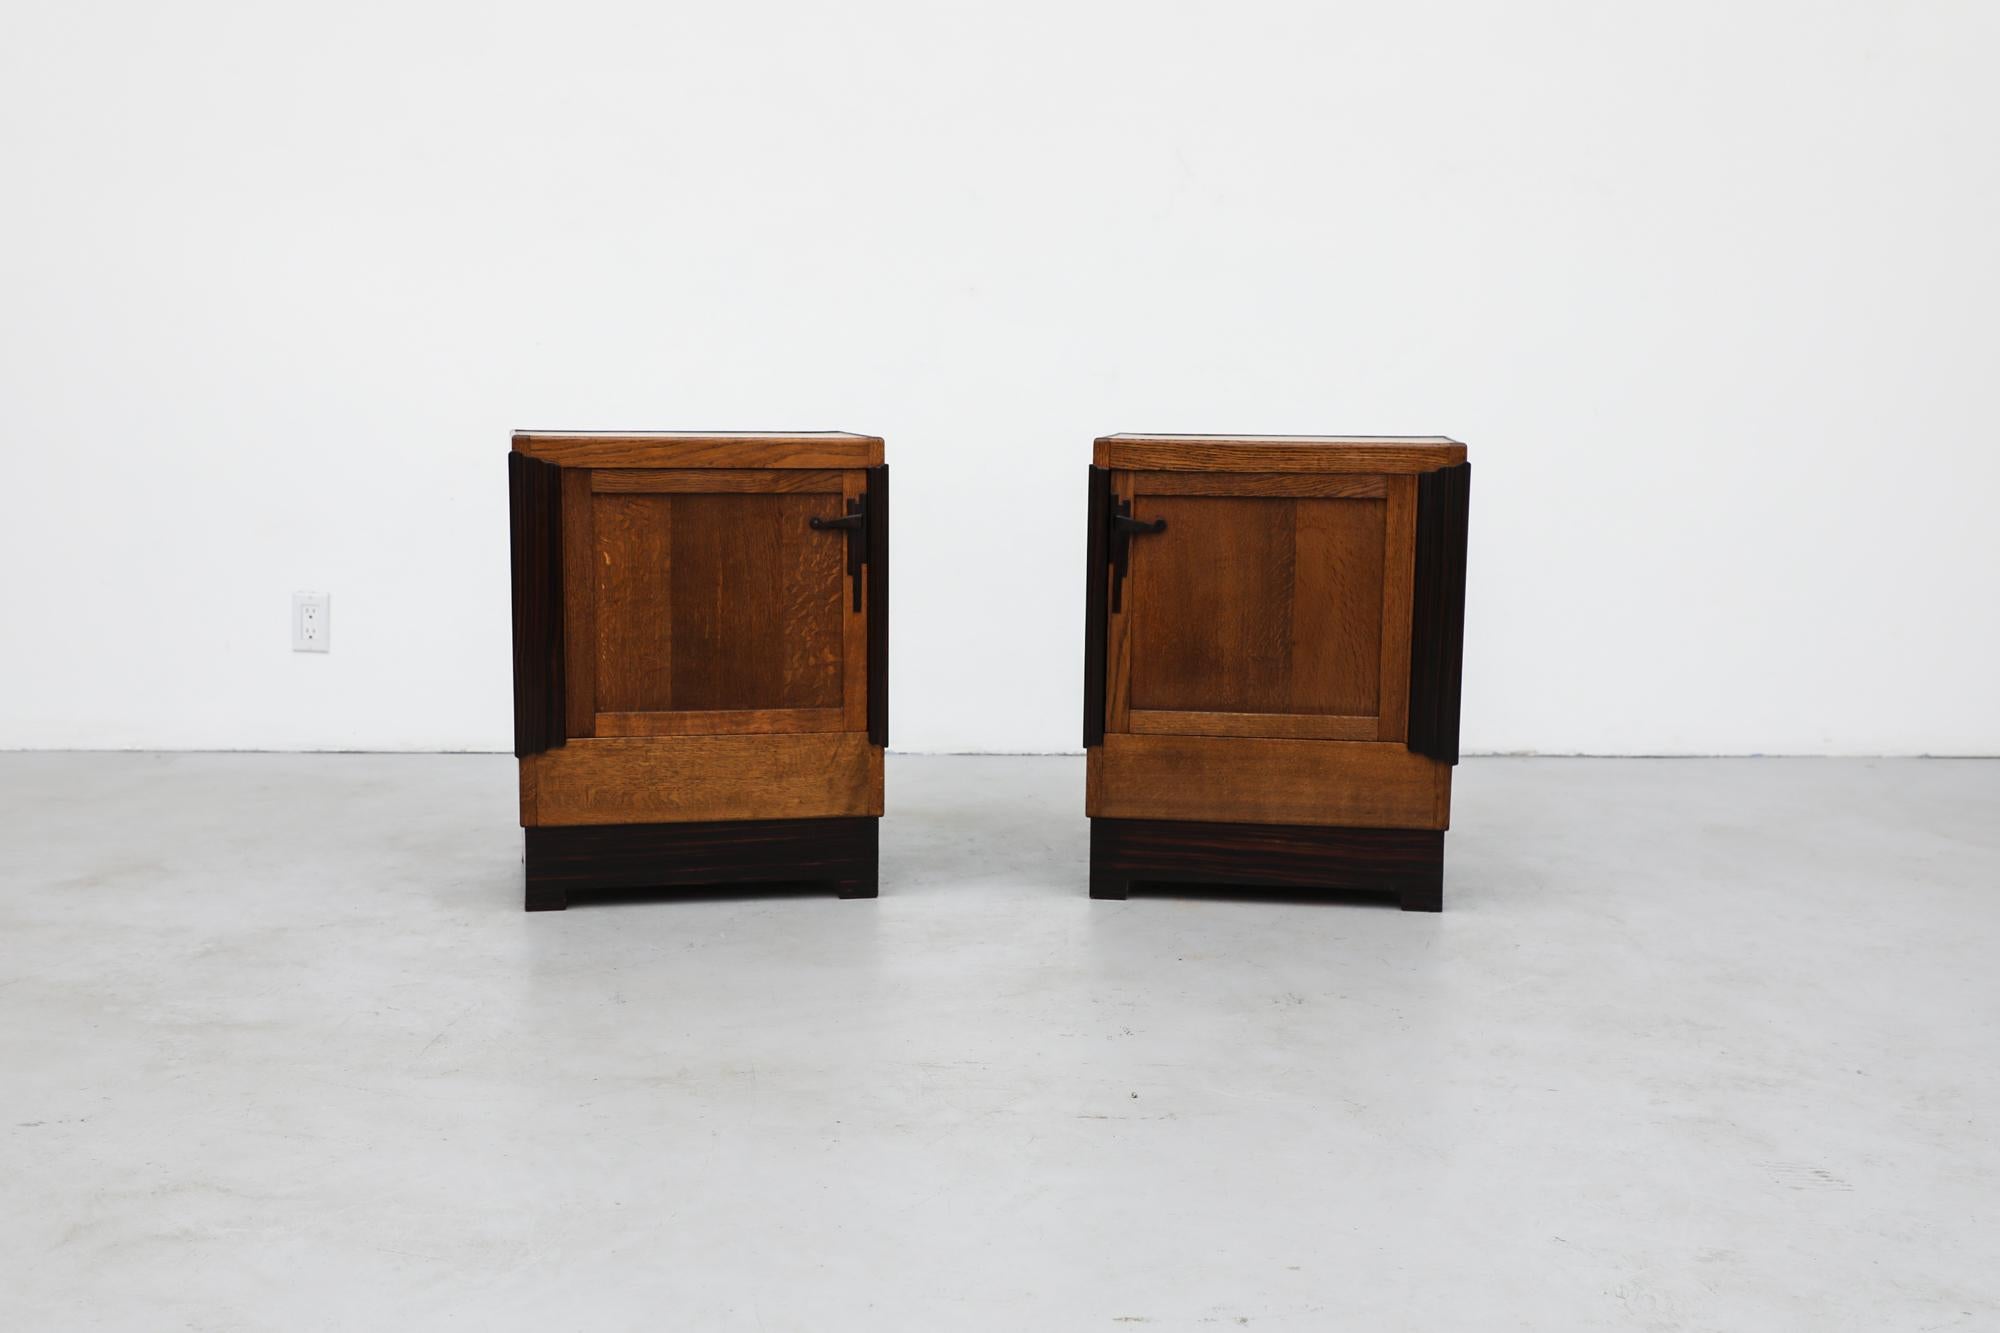 Pair of Art Deco cabinets each with single door and inner shelves. These delicate cabinets have an oak body with ebony and cocobolo accents. One has wood blocks glued inside on the floor of the cabinet, the use and reason are unknown. The vibrant